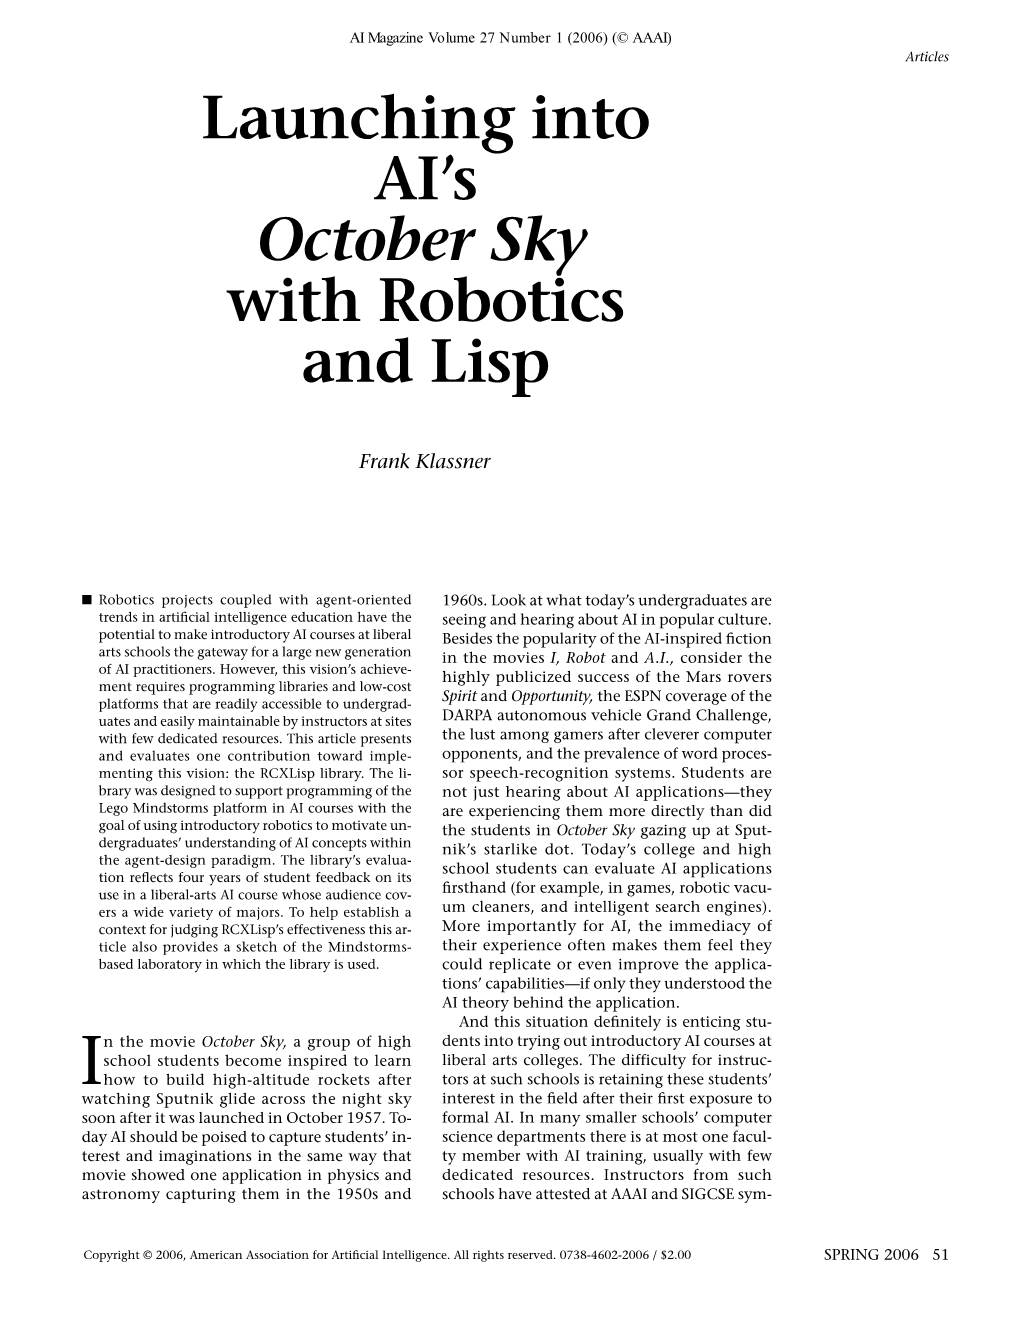 Launching Into AI's October Sky with Robotics and Lisp